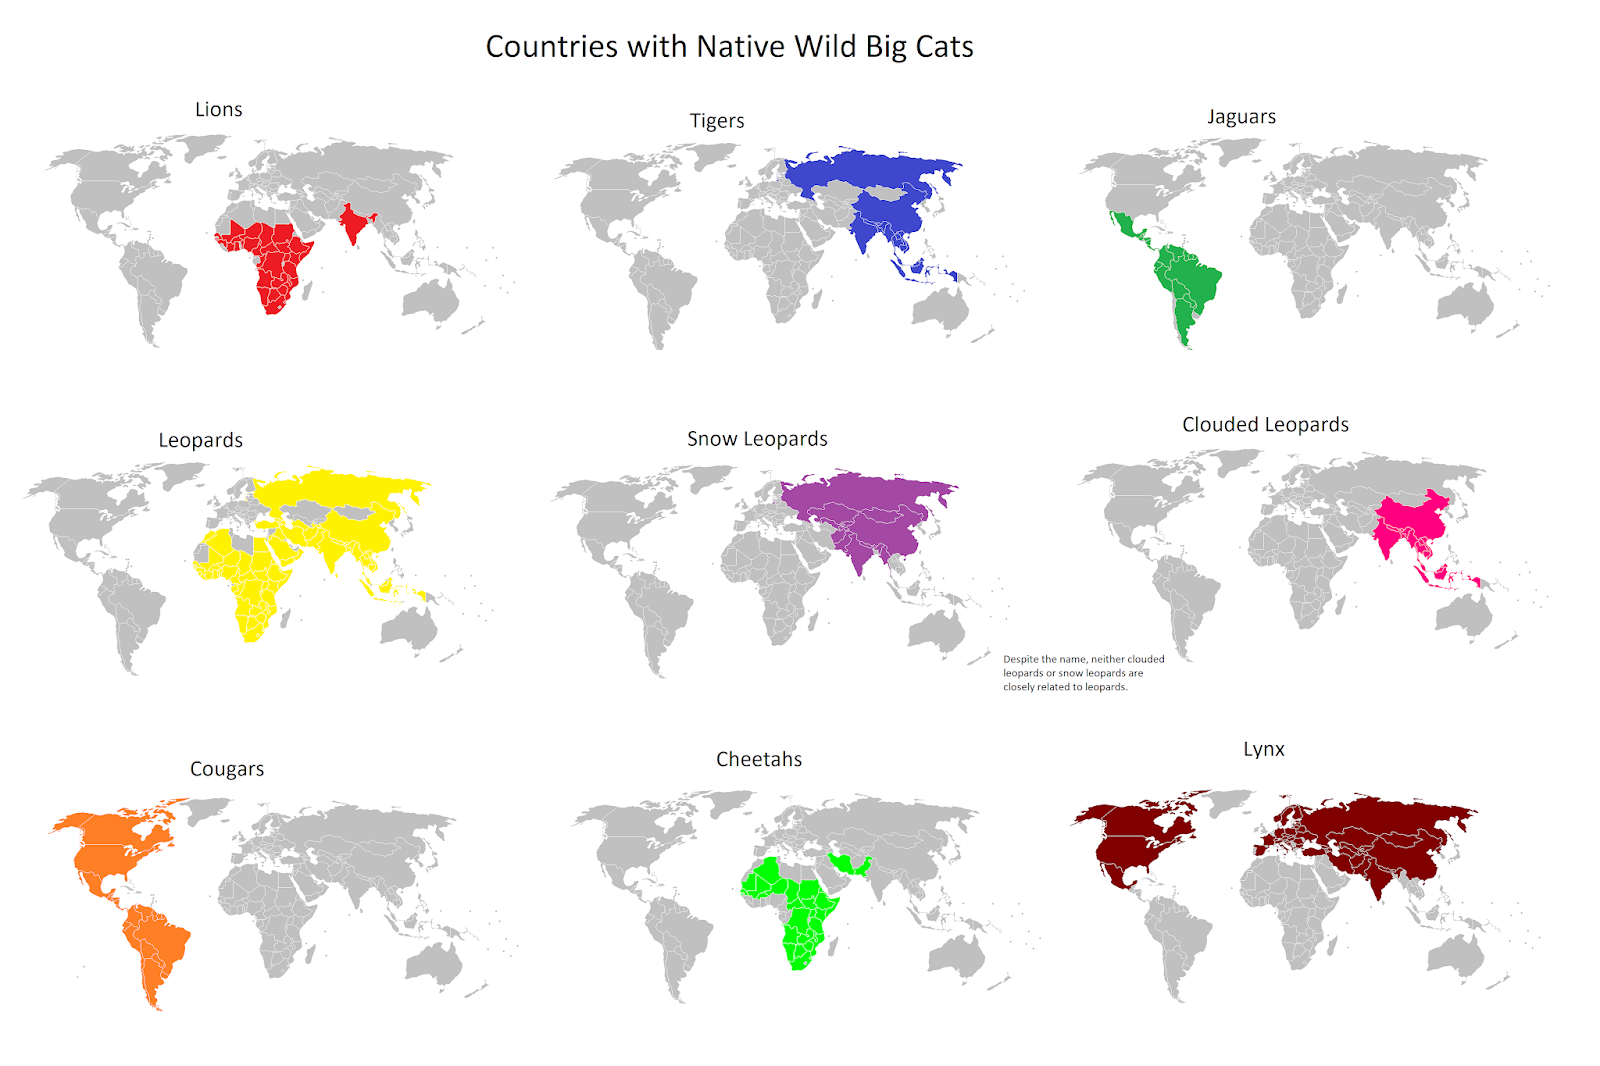 Nations with native wild big cats